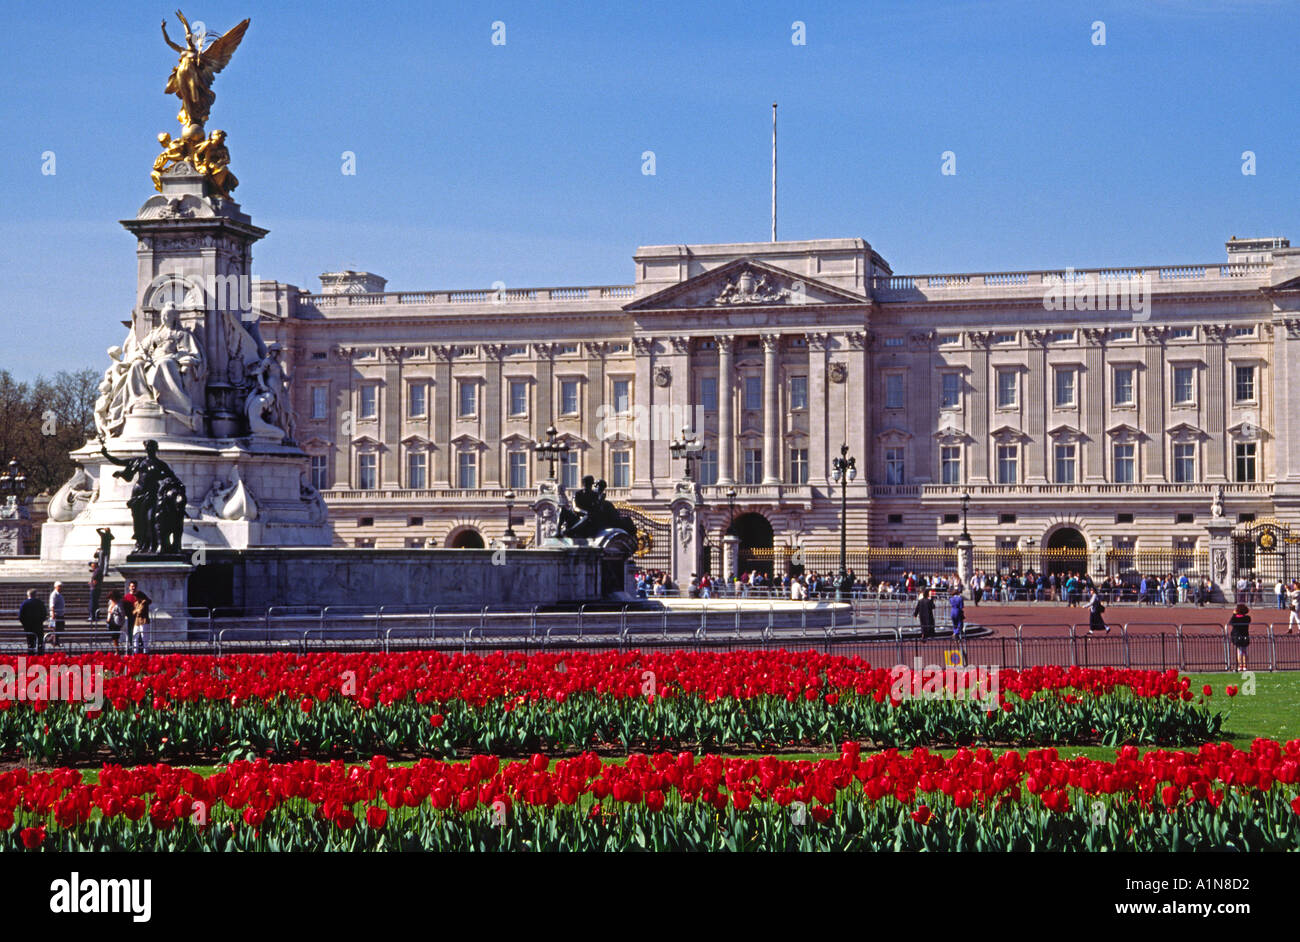 Red tulips in the flower beds outside Buckingham Palace and the Queen Victoria Memorial   London England Stock Photo